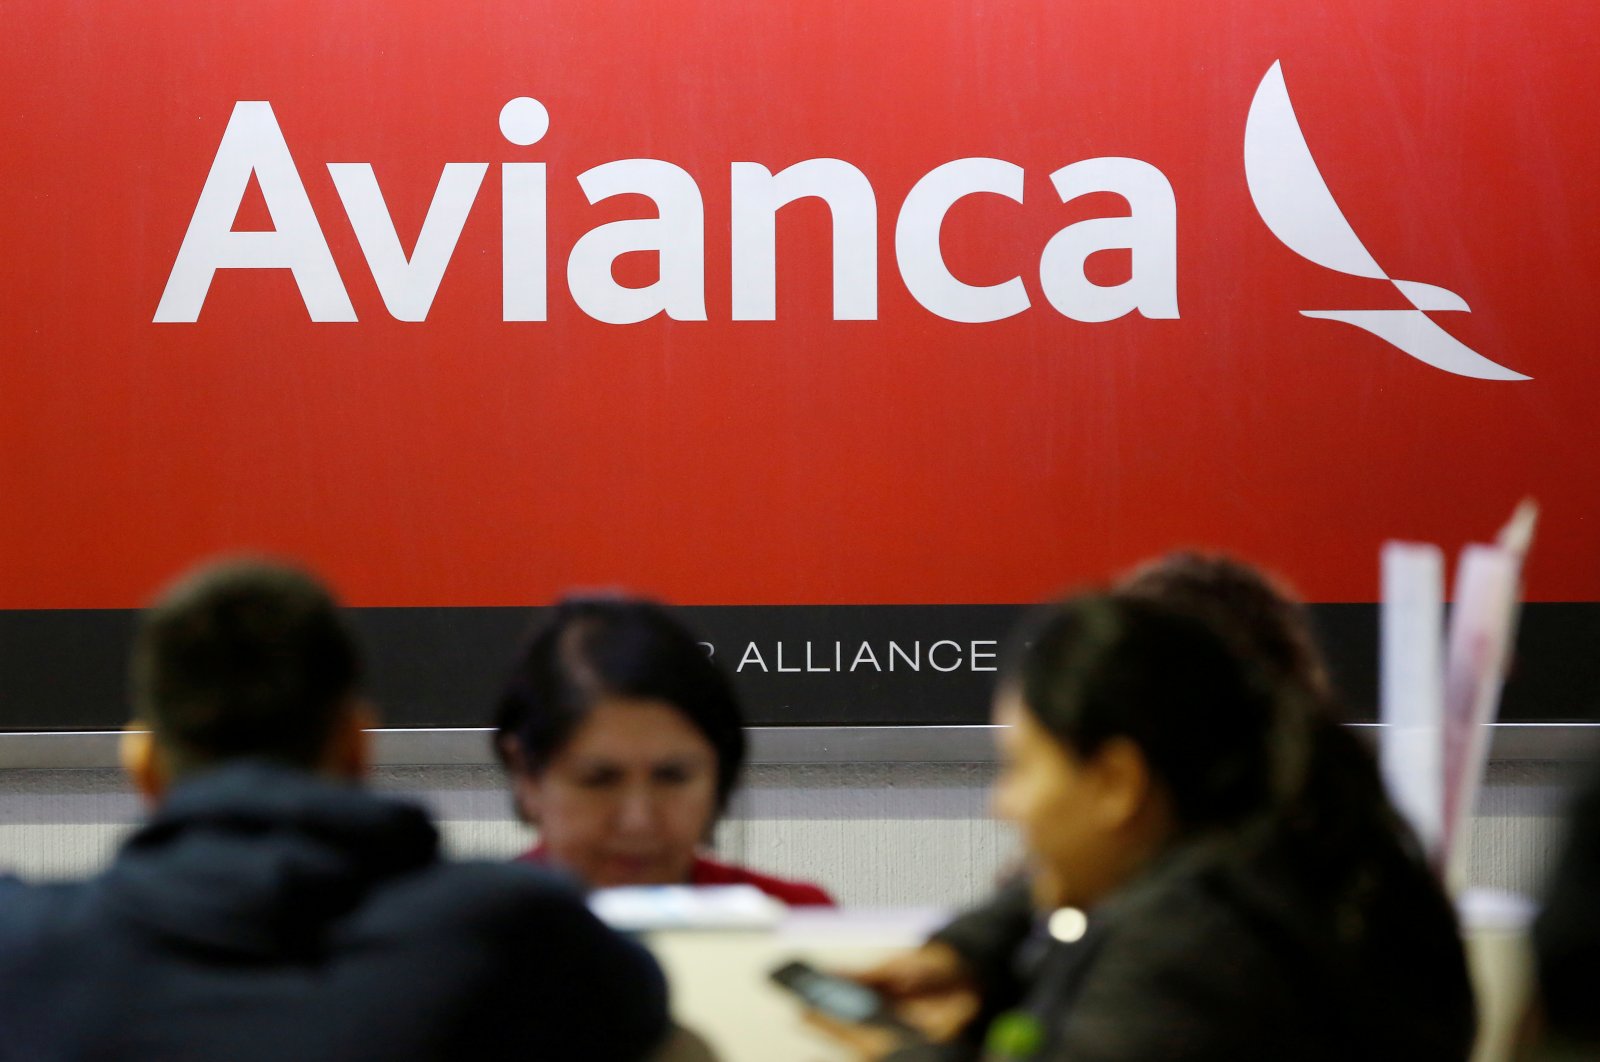 The logo of Avianca Airlines is pictured at a counter following the cancellation of Avianca flight 431, after El Salvador's President Nayib Bukele accused Mexico of allowing a dozen confirmed coronavirus (COVID-19) cases to board the flight due to leave Mexico City for San Salvador, at the Benito Juarez International Airport in Mexico City, Mexico, March 16, 2020.  (Reuters File Photo)